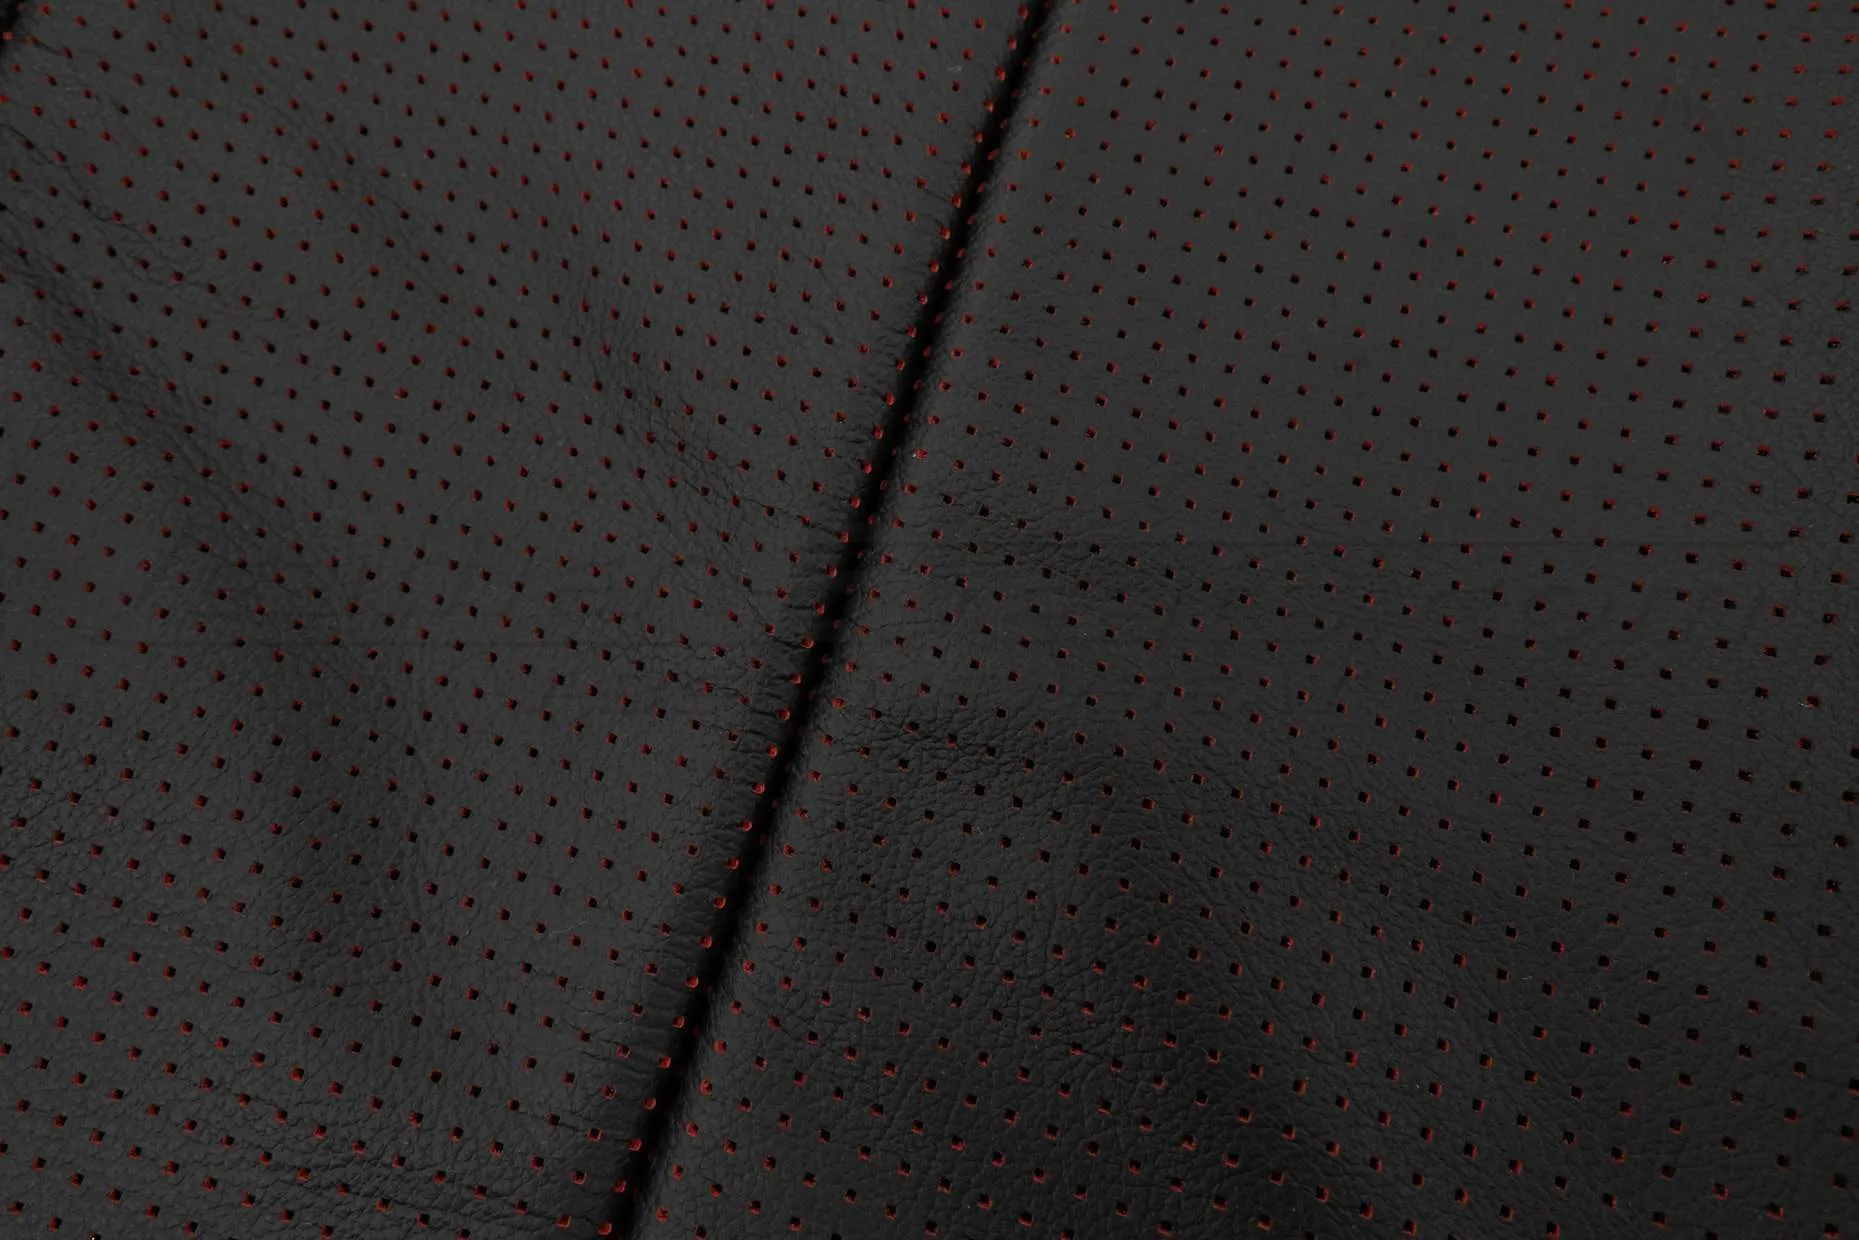 Red Piazza Perforation close-up